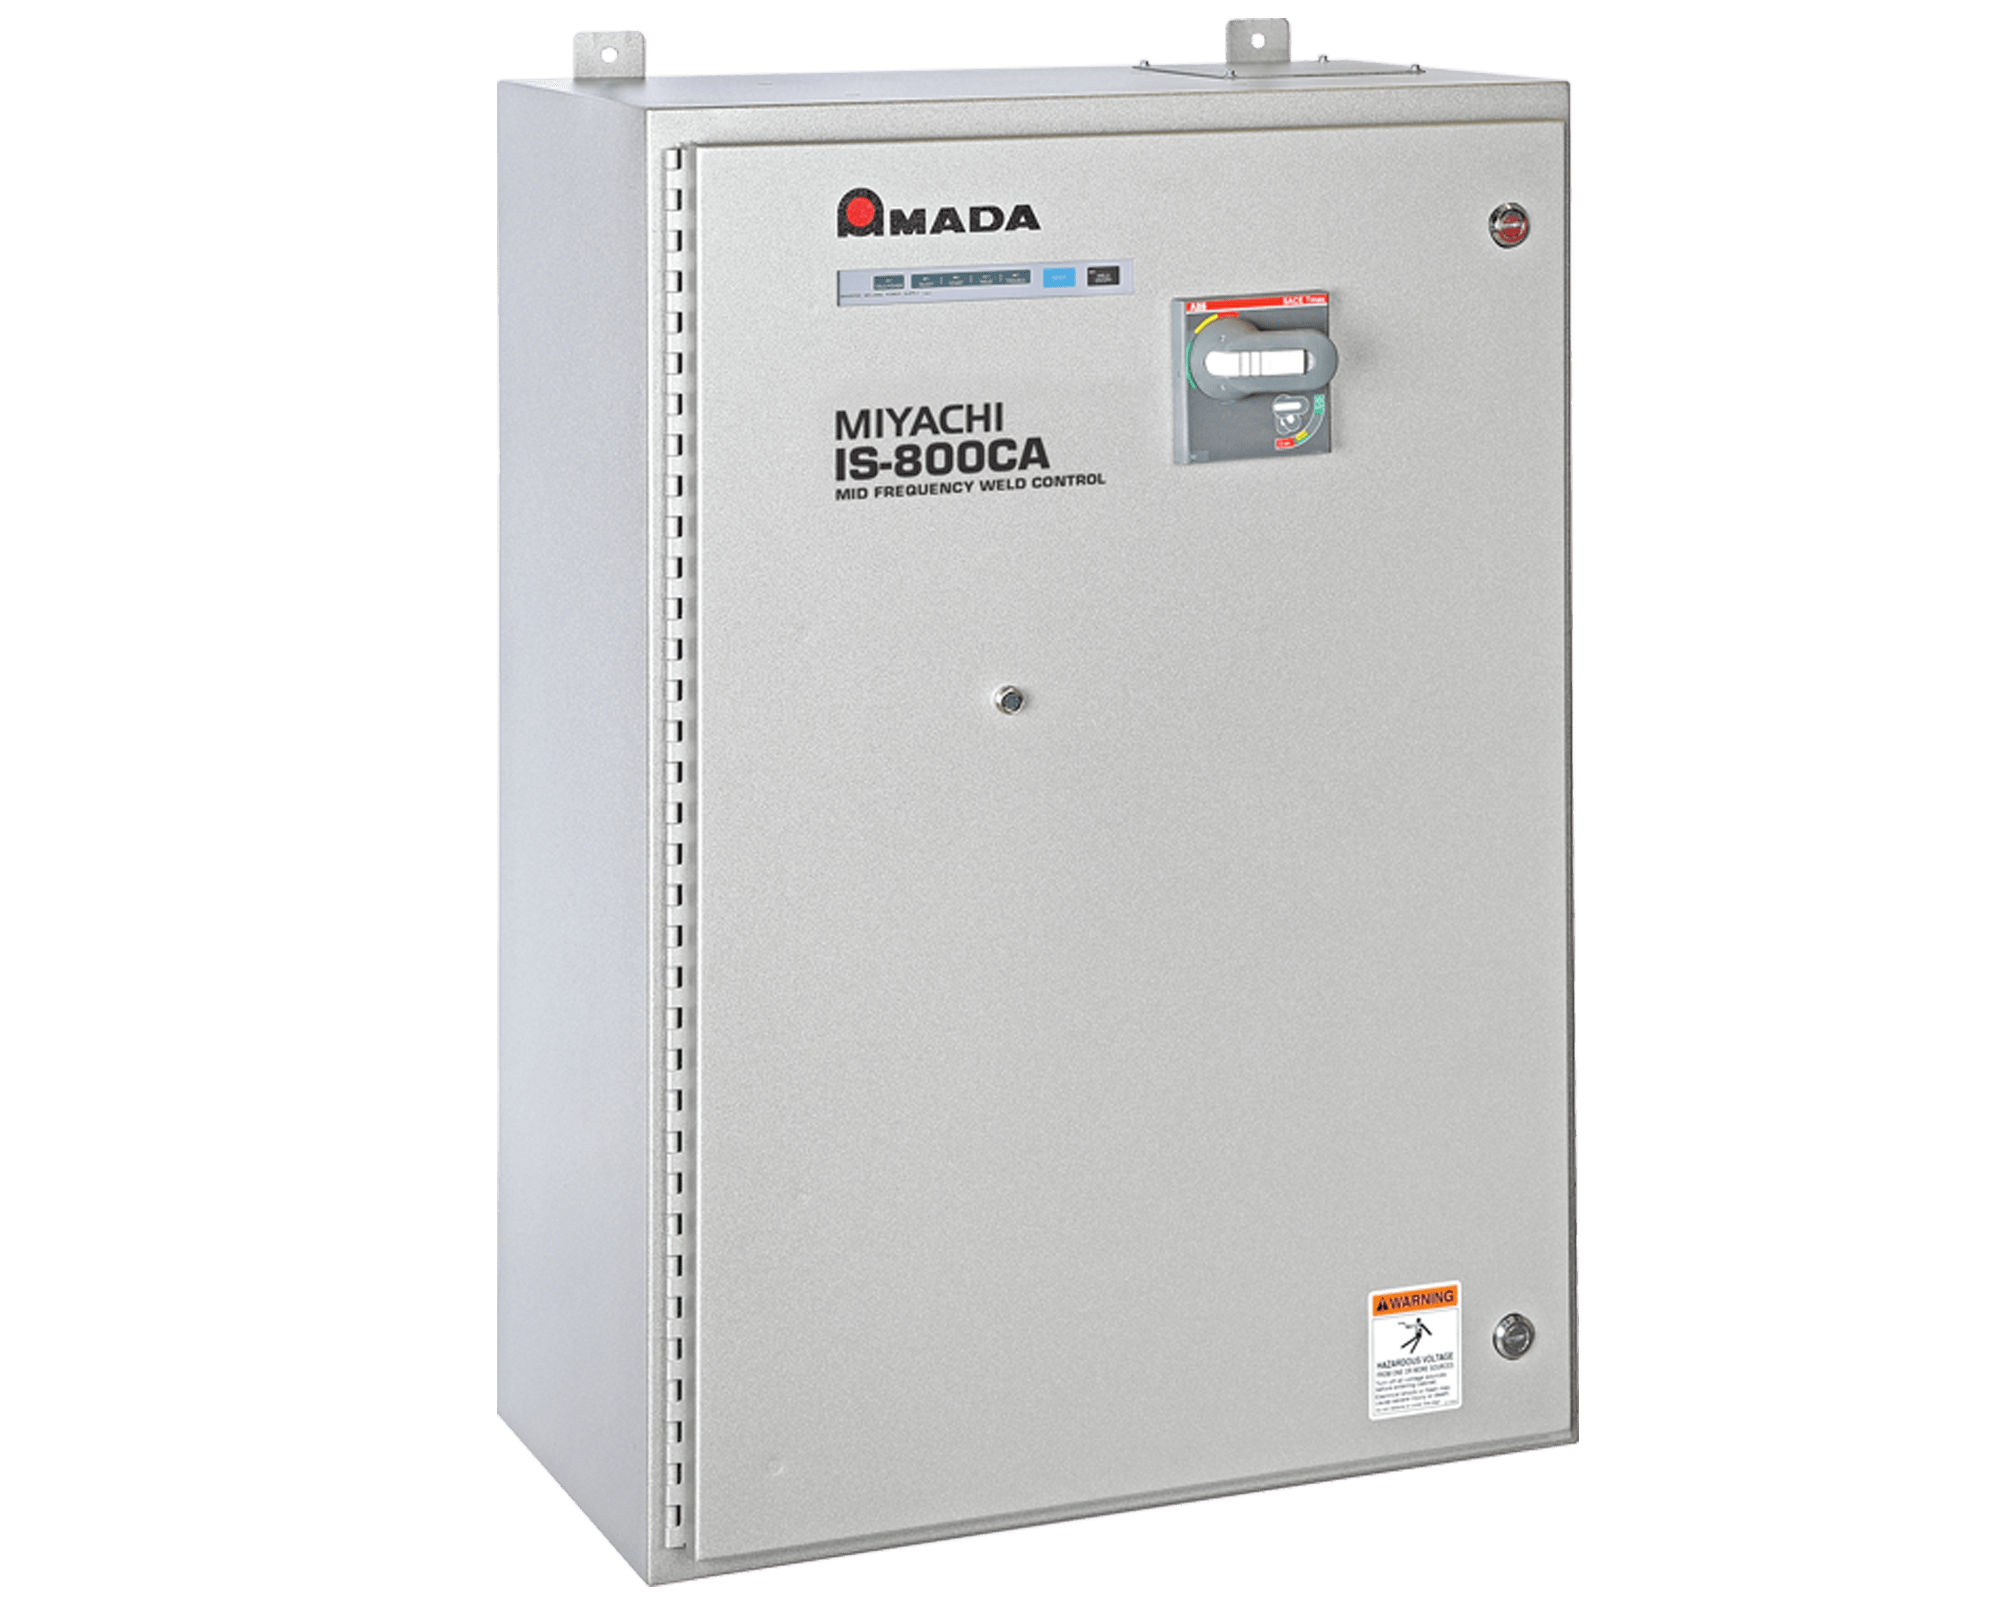 IS-300CA Mid Frequency Inverter Weld Control